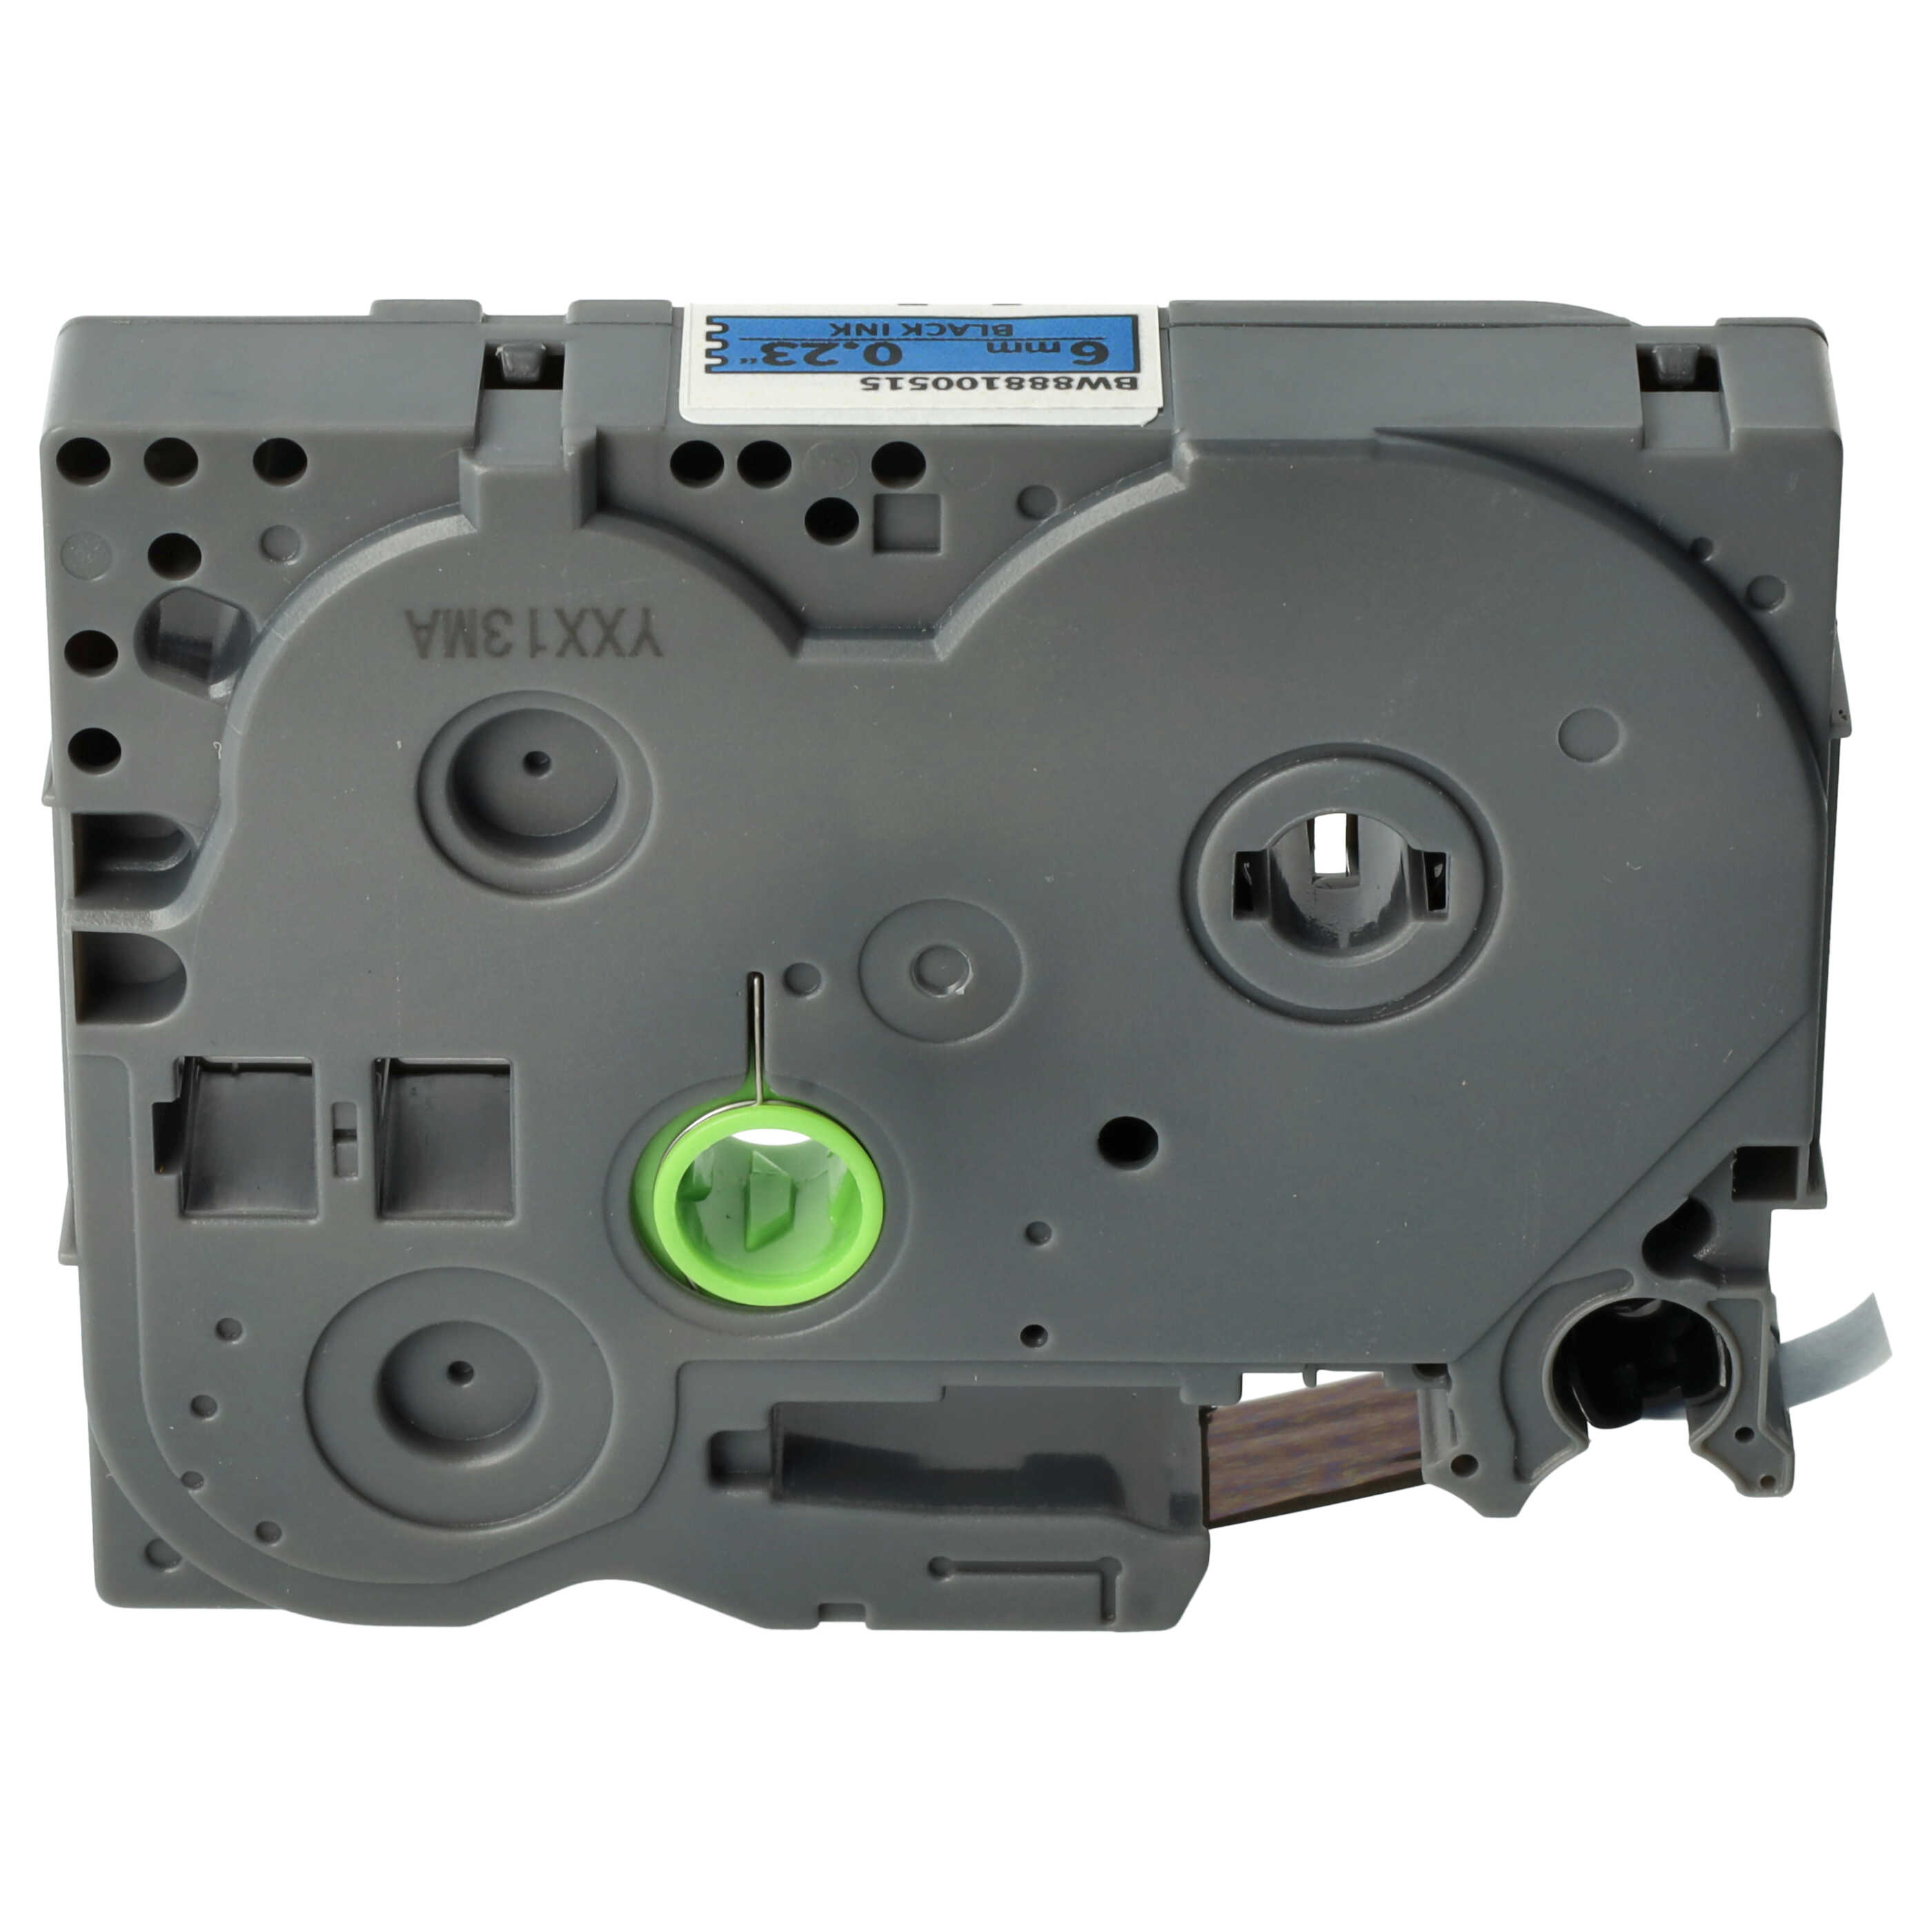 Label Tape as Replacement for Brother TZeFX511, TZ-FX511, TZE-FX511, TZFX511 - 6 mm Black to Blue, Flexible